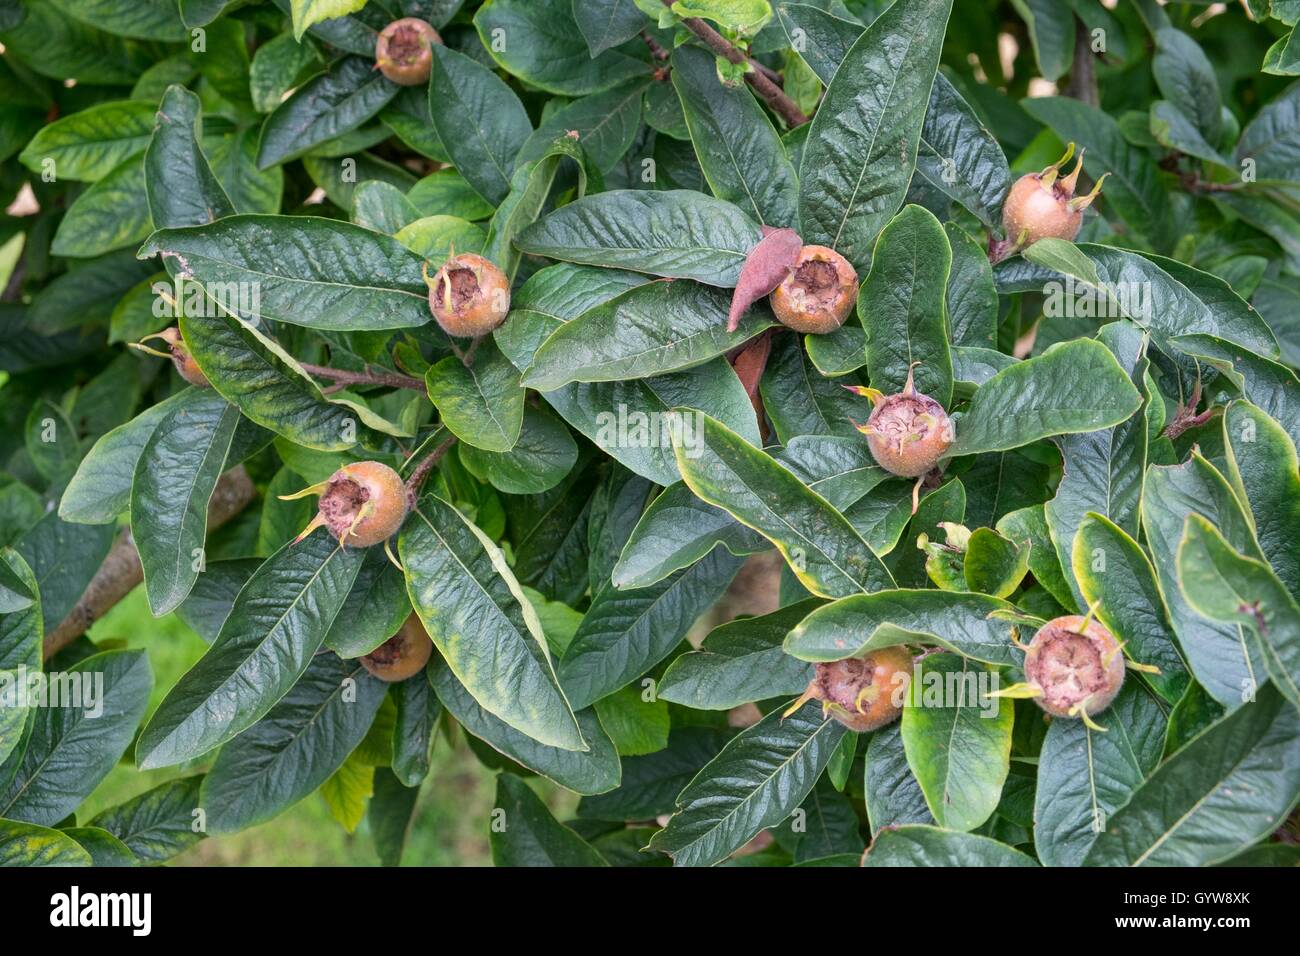 Mespilus germanica, known as the medlar or common medlar. Stock Photo